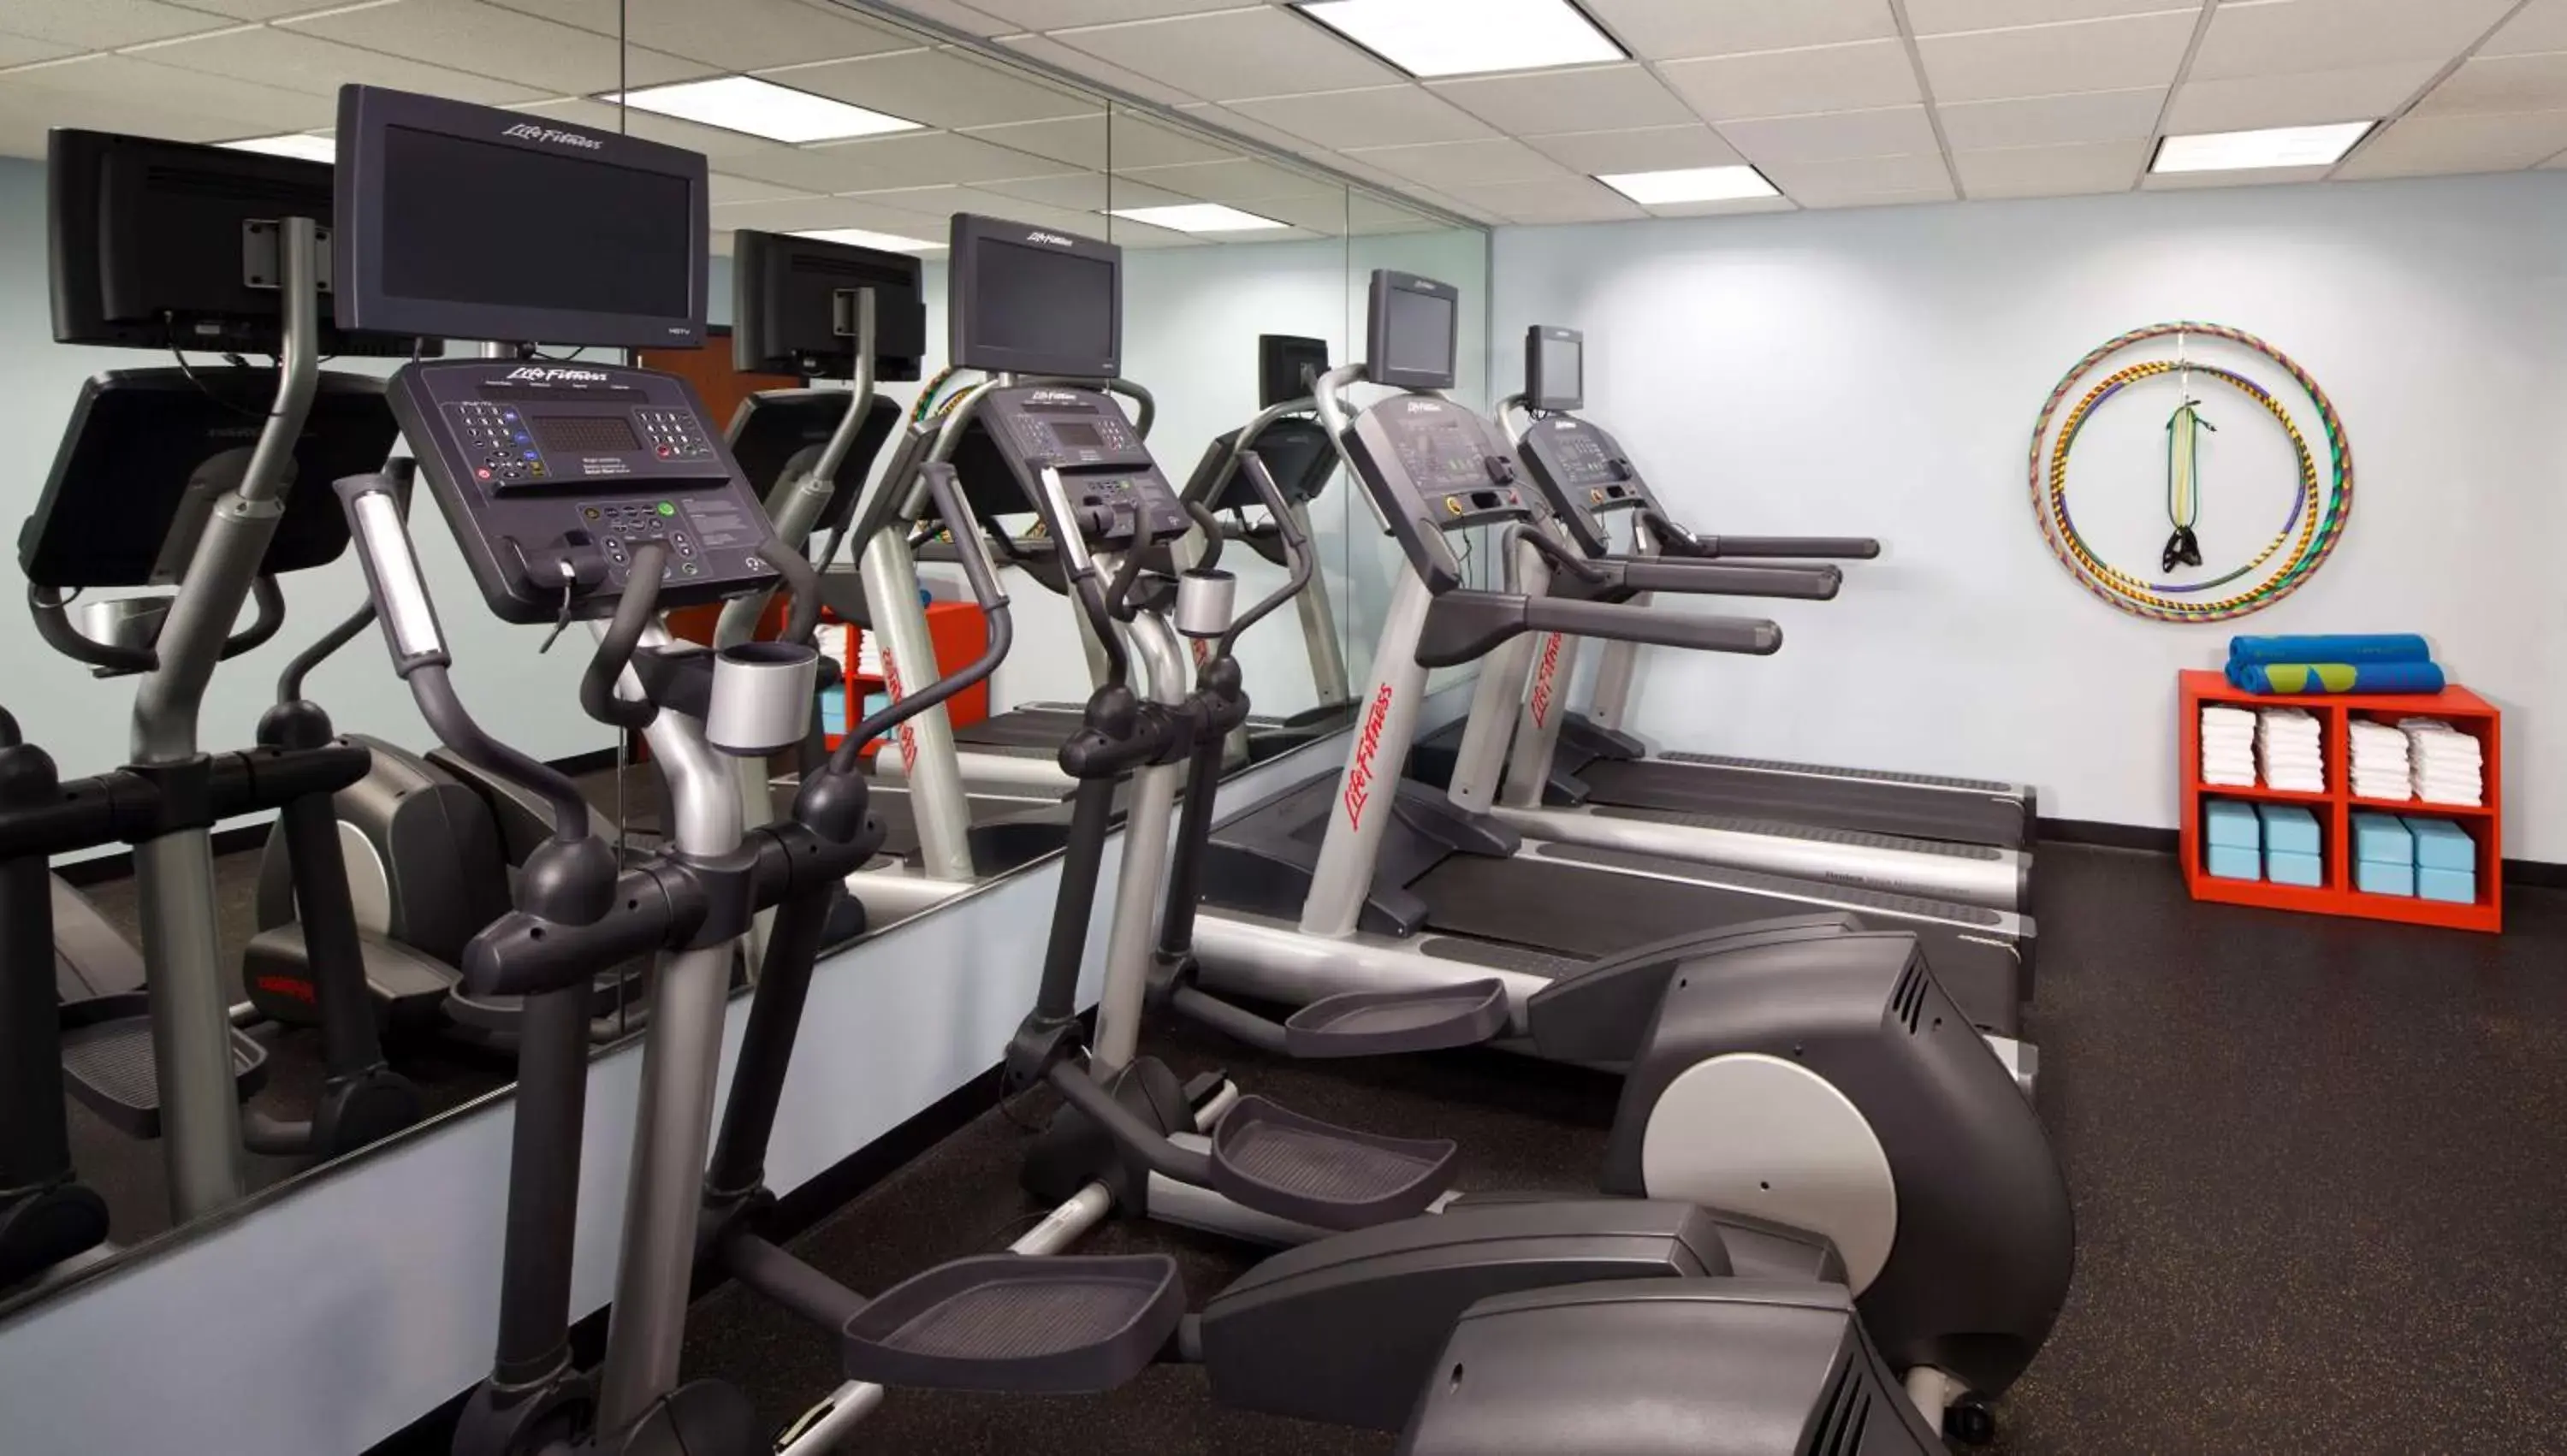 Fitness centre/facilities, Fitness Center/Facilities in Onyx Boston Downtown